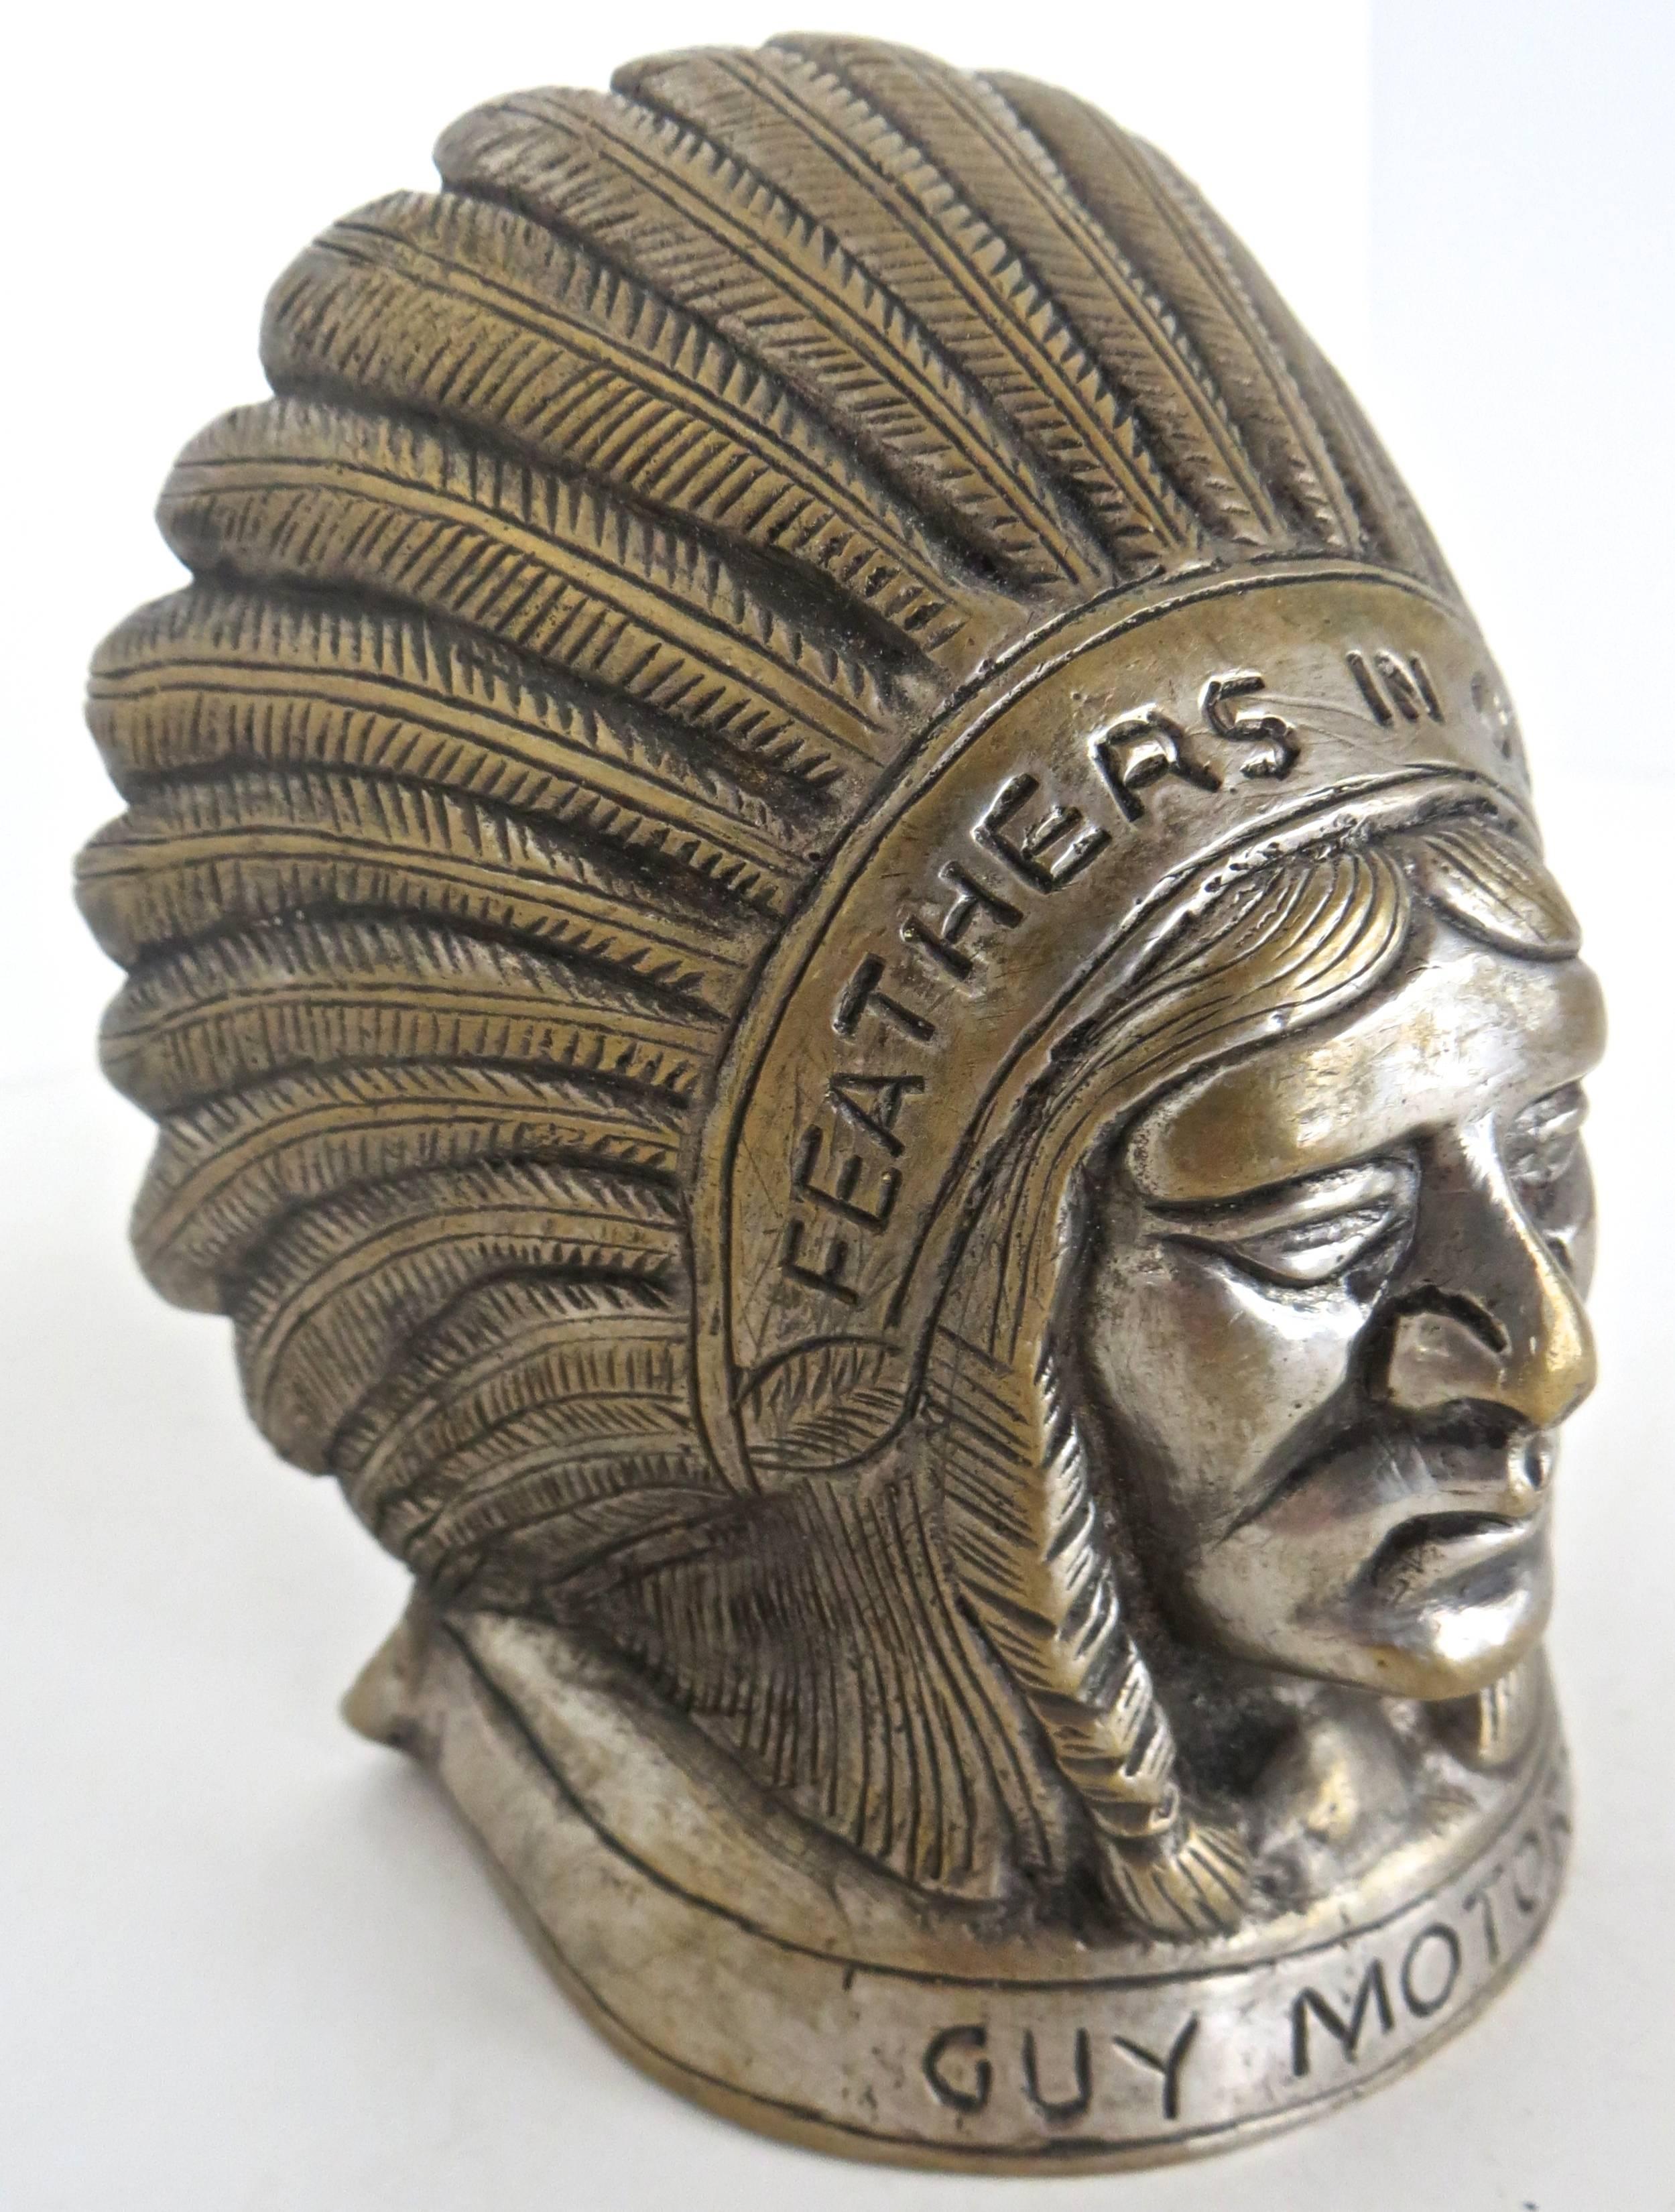 Actual original hood ornament of an Indian in full head dress, entitled and embossed 